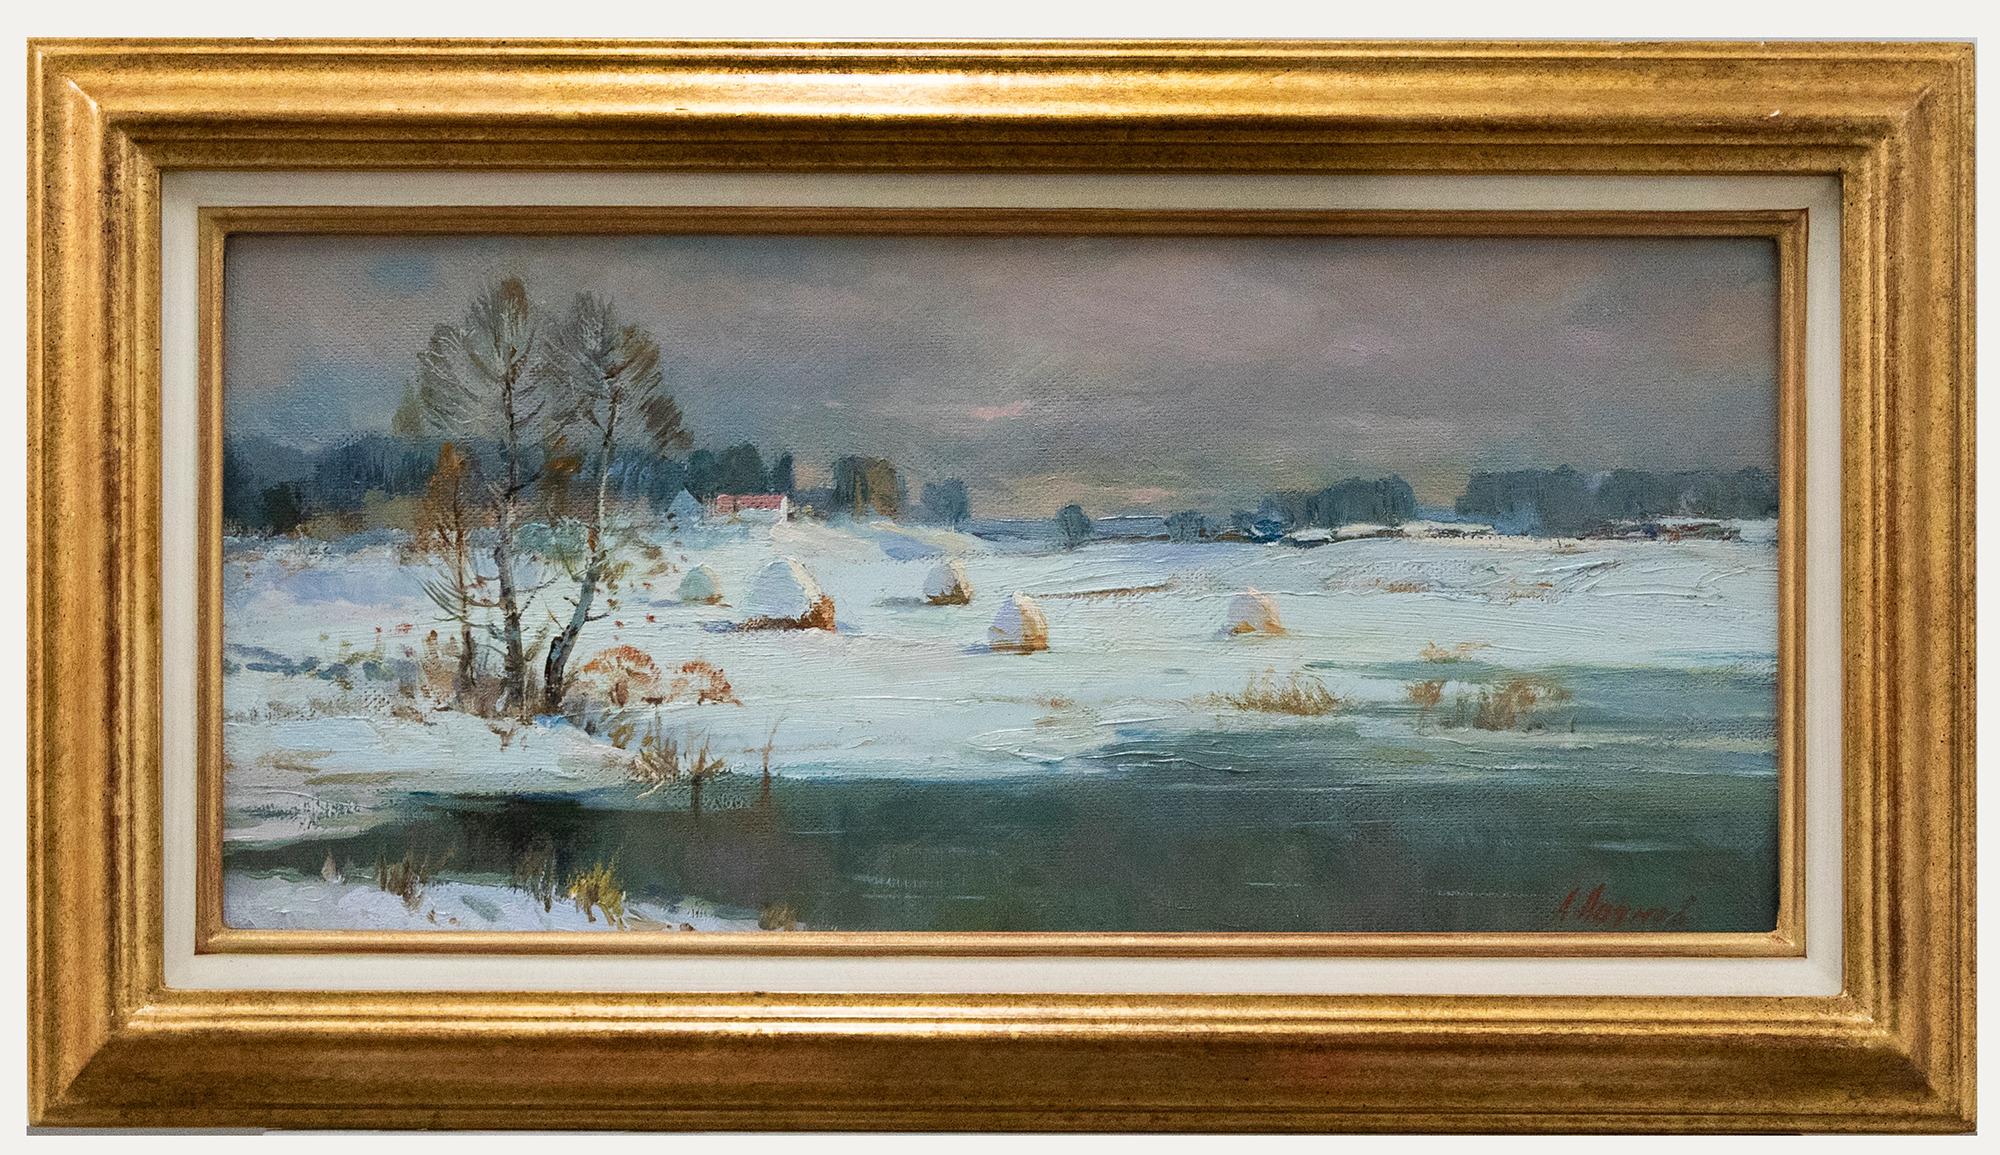 Anatoly Nikolaevich Ladnov (b.1935) - Russian  20th Century Oil, A Frosty Day